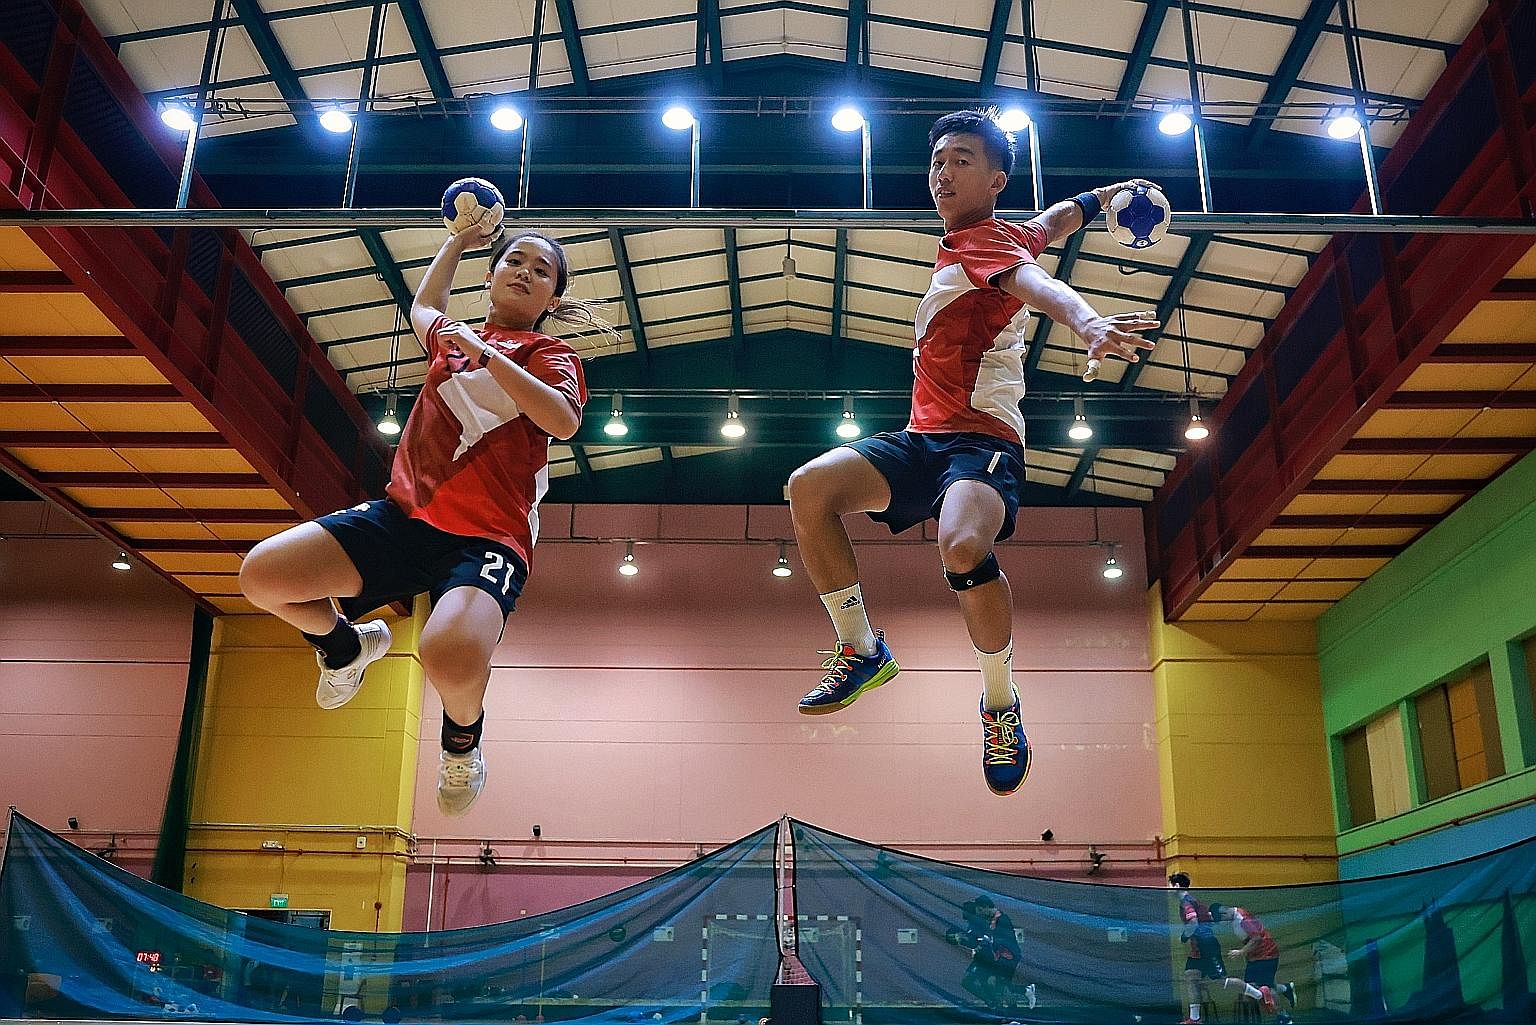 National handballer Ham Jia Yun, 30, and men's captain Teo Kee Chong, 25, showing skill and agility in shooting during training. They have been playing the sport for about 10 years.